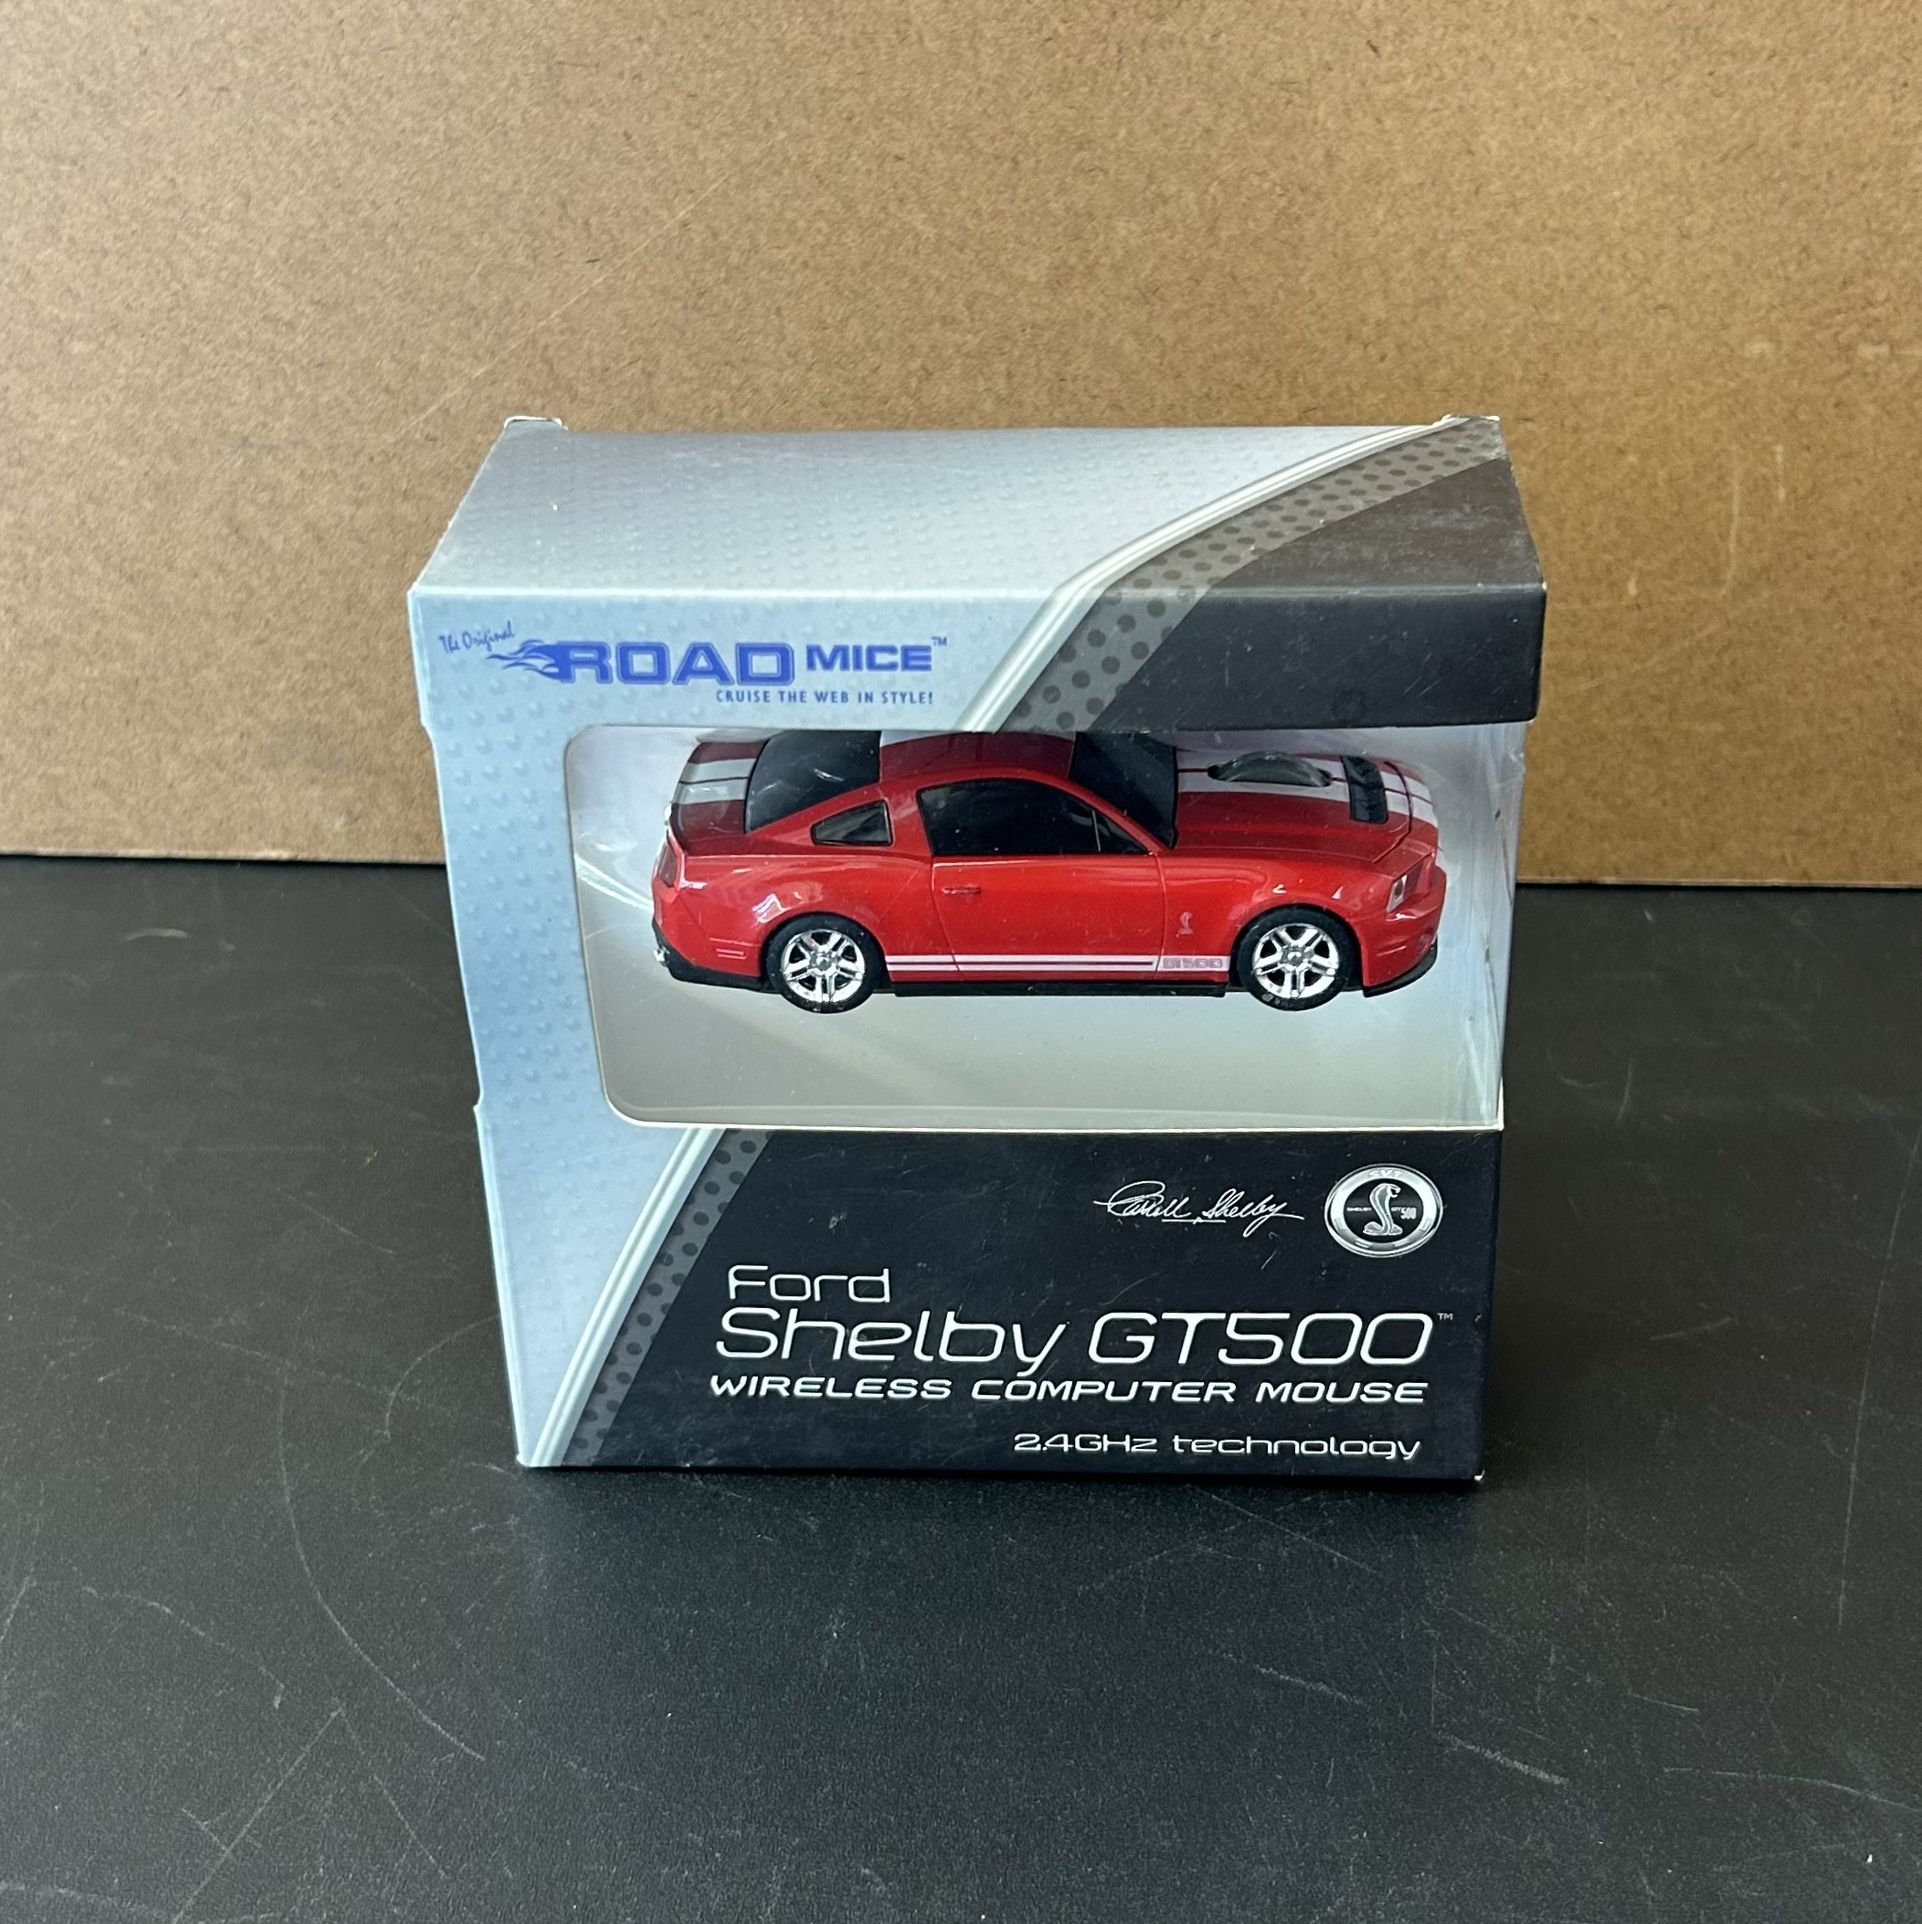 ROAD MICE “Ford GT 500” Mustang Wireless Computer Mouse(NIB)